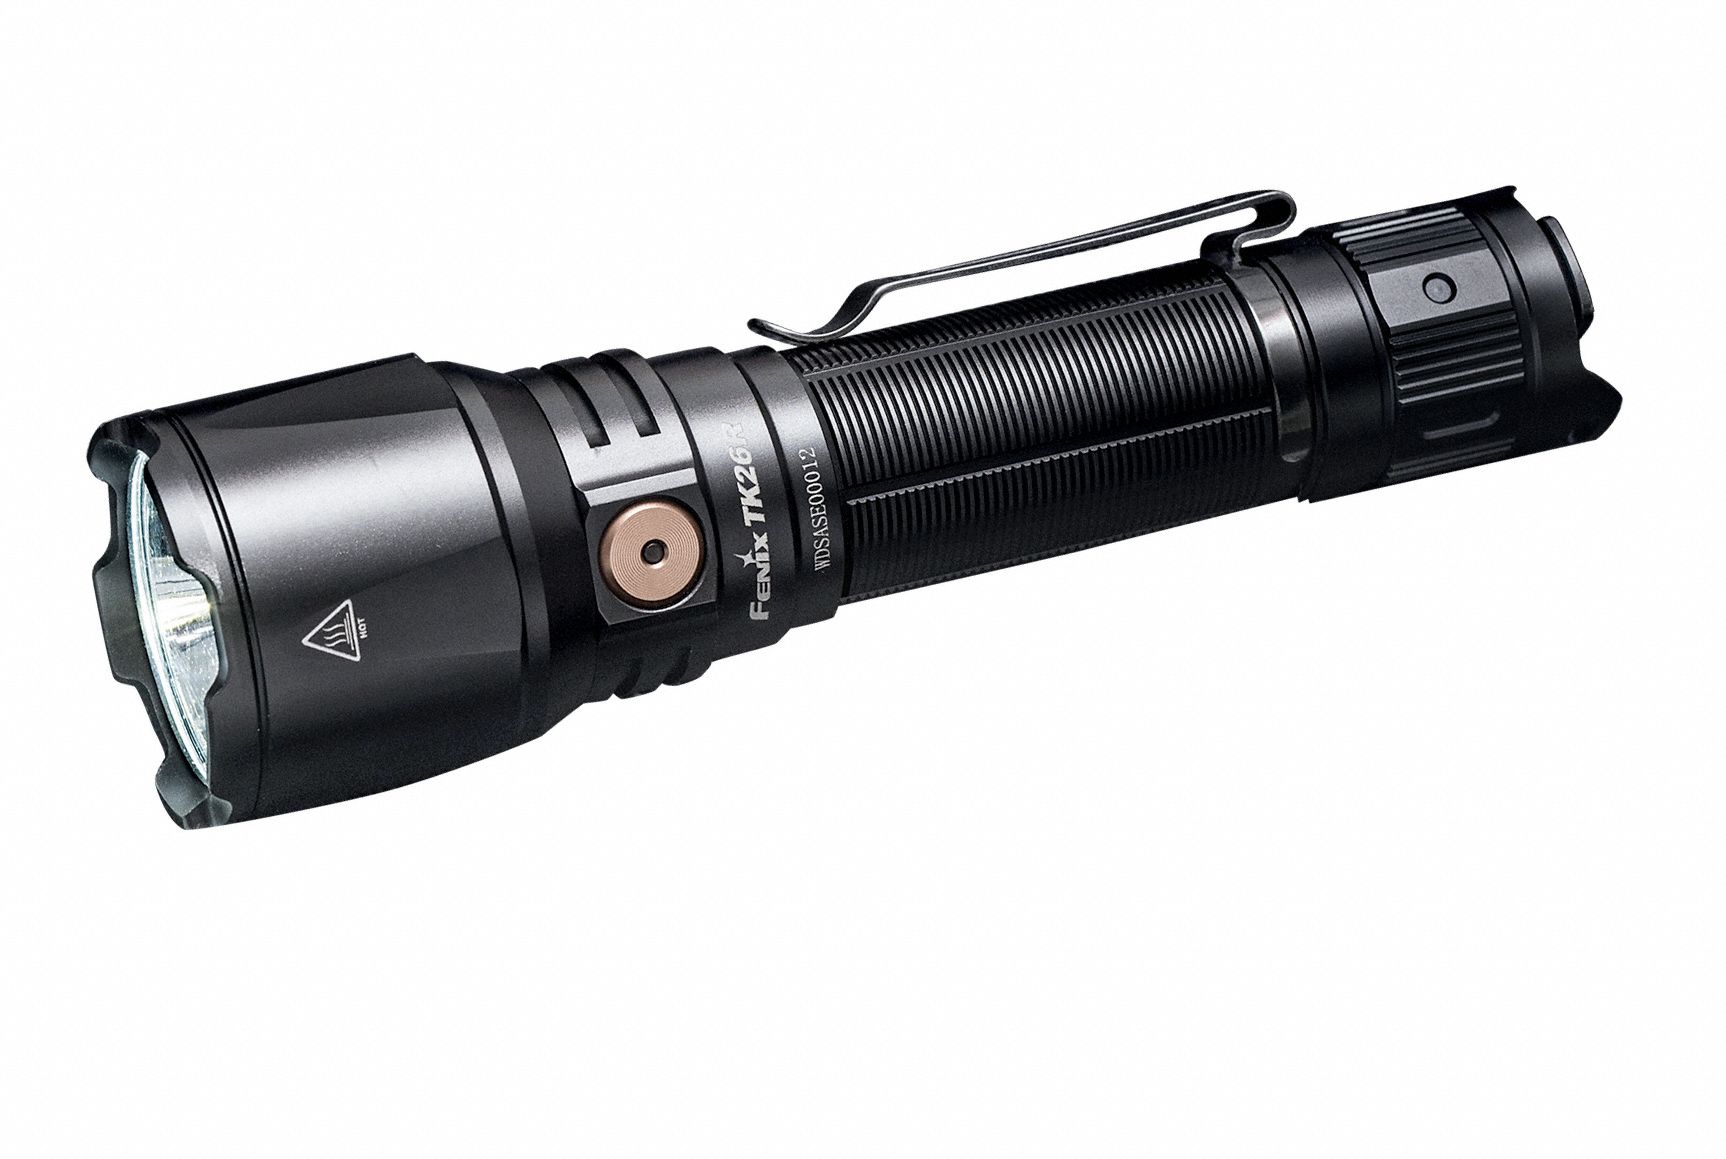 Rechargeable Flashlight: Rechargeable, 1,500 lm Max Brightness, 4 Light Output Levels